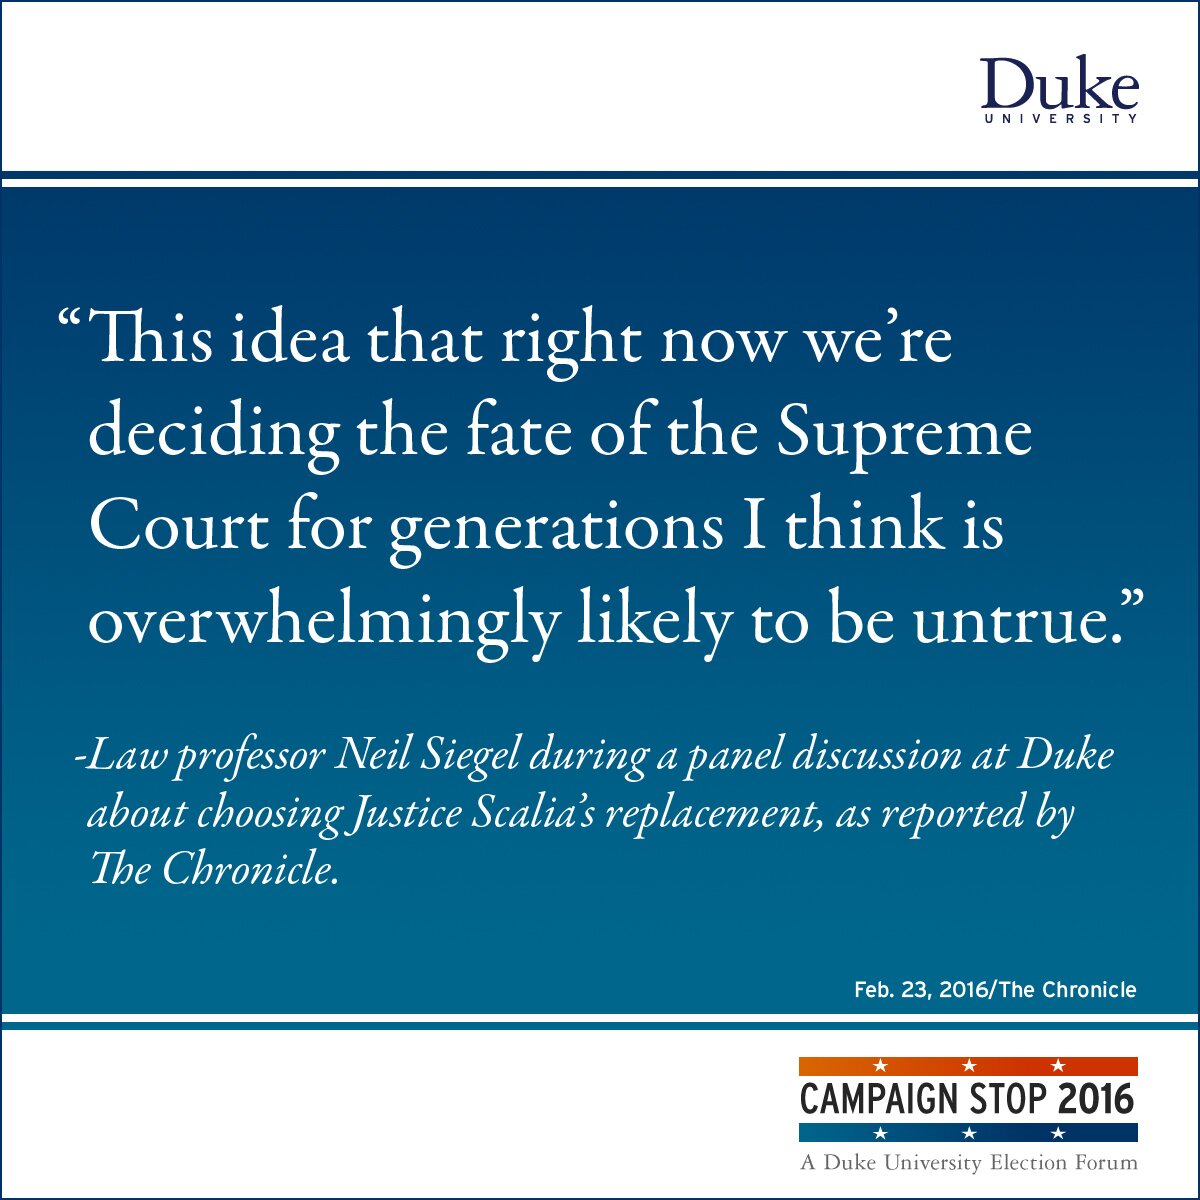 “This idea that right now we’re deciding the fate of the Supreme Court for generations I think is overwhelmingly likely to be untrue.” -Law professor Neil Siegel during a panel discussion at Duke about choosing Justice Scalia’s replacement, as reported by The Chronicle.